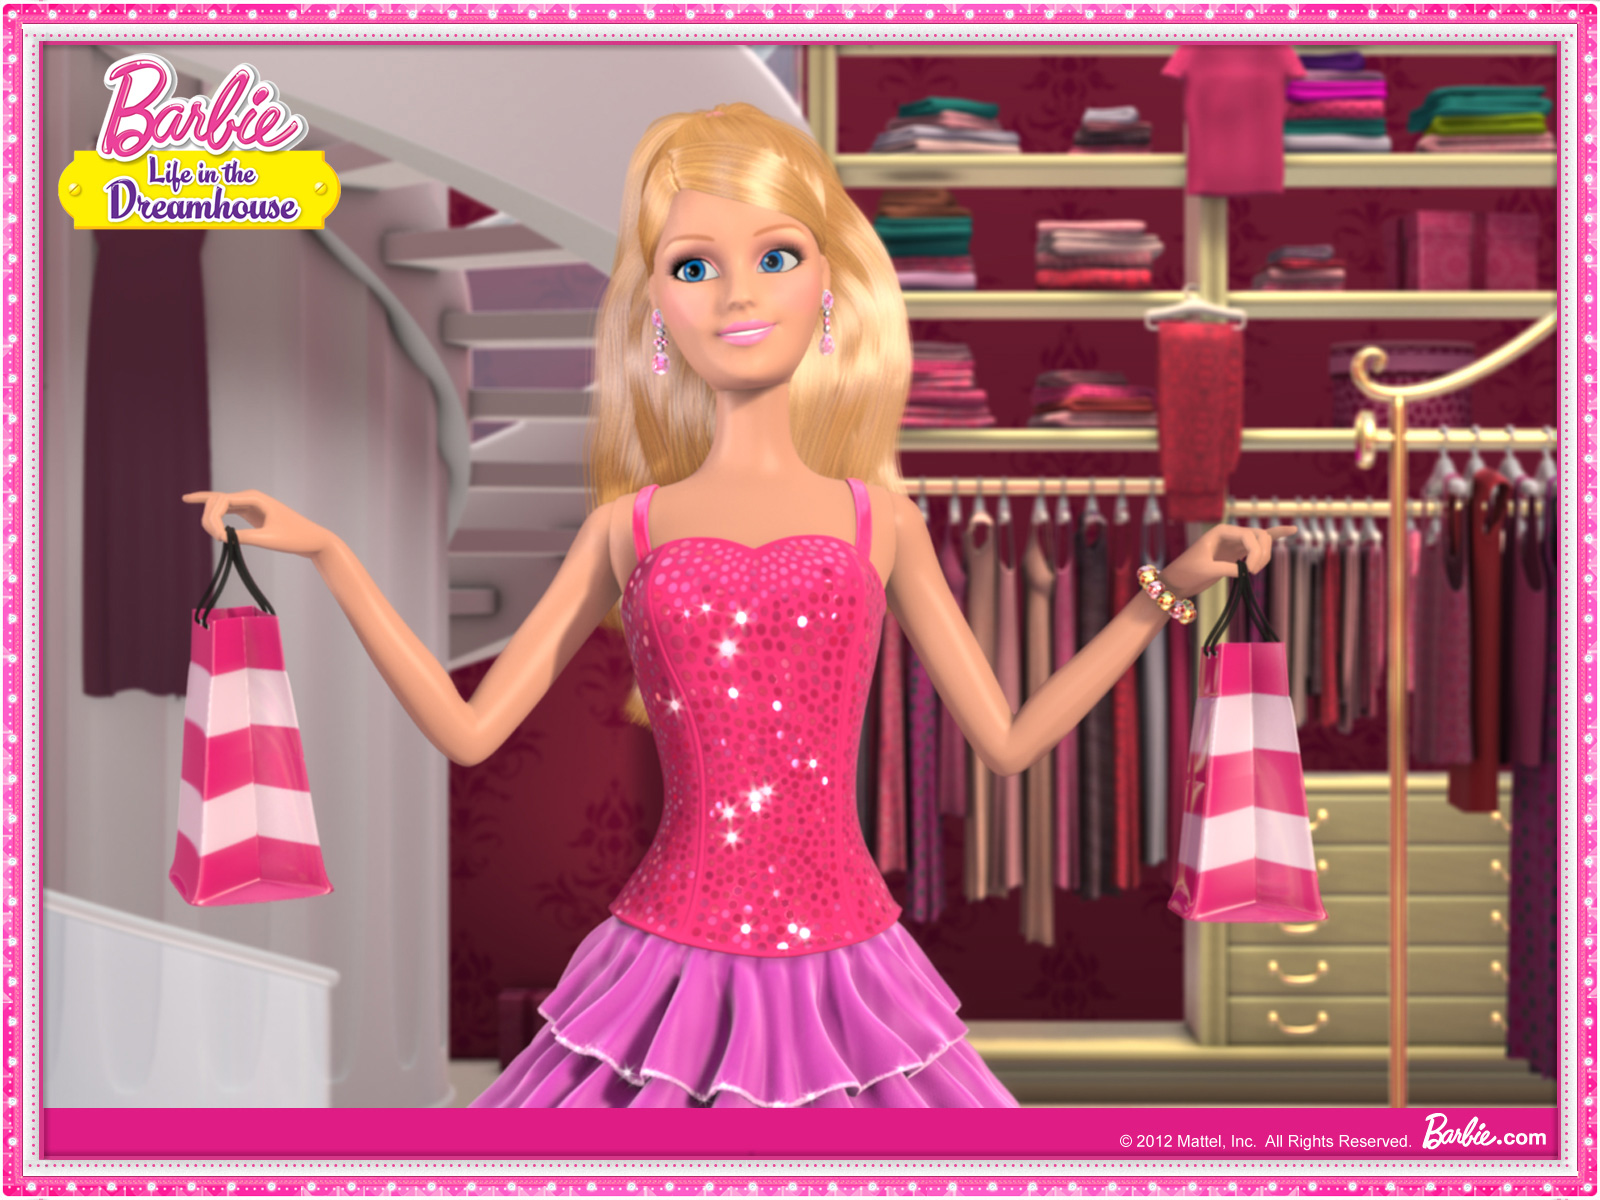 Download this Barbie Life The Dreamhouse Dream House picture